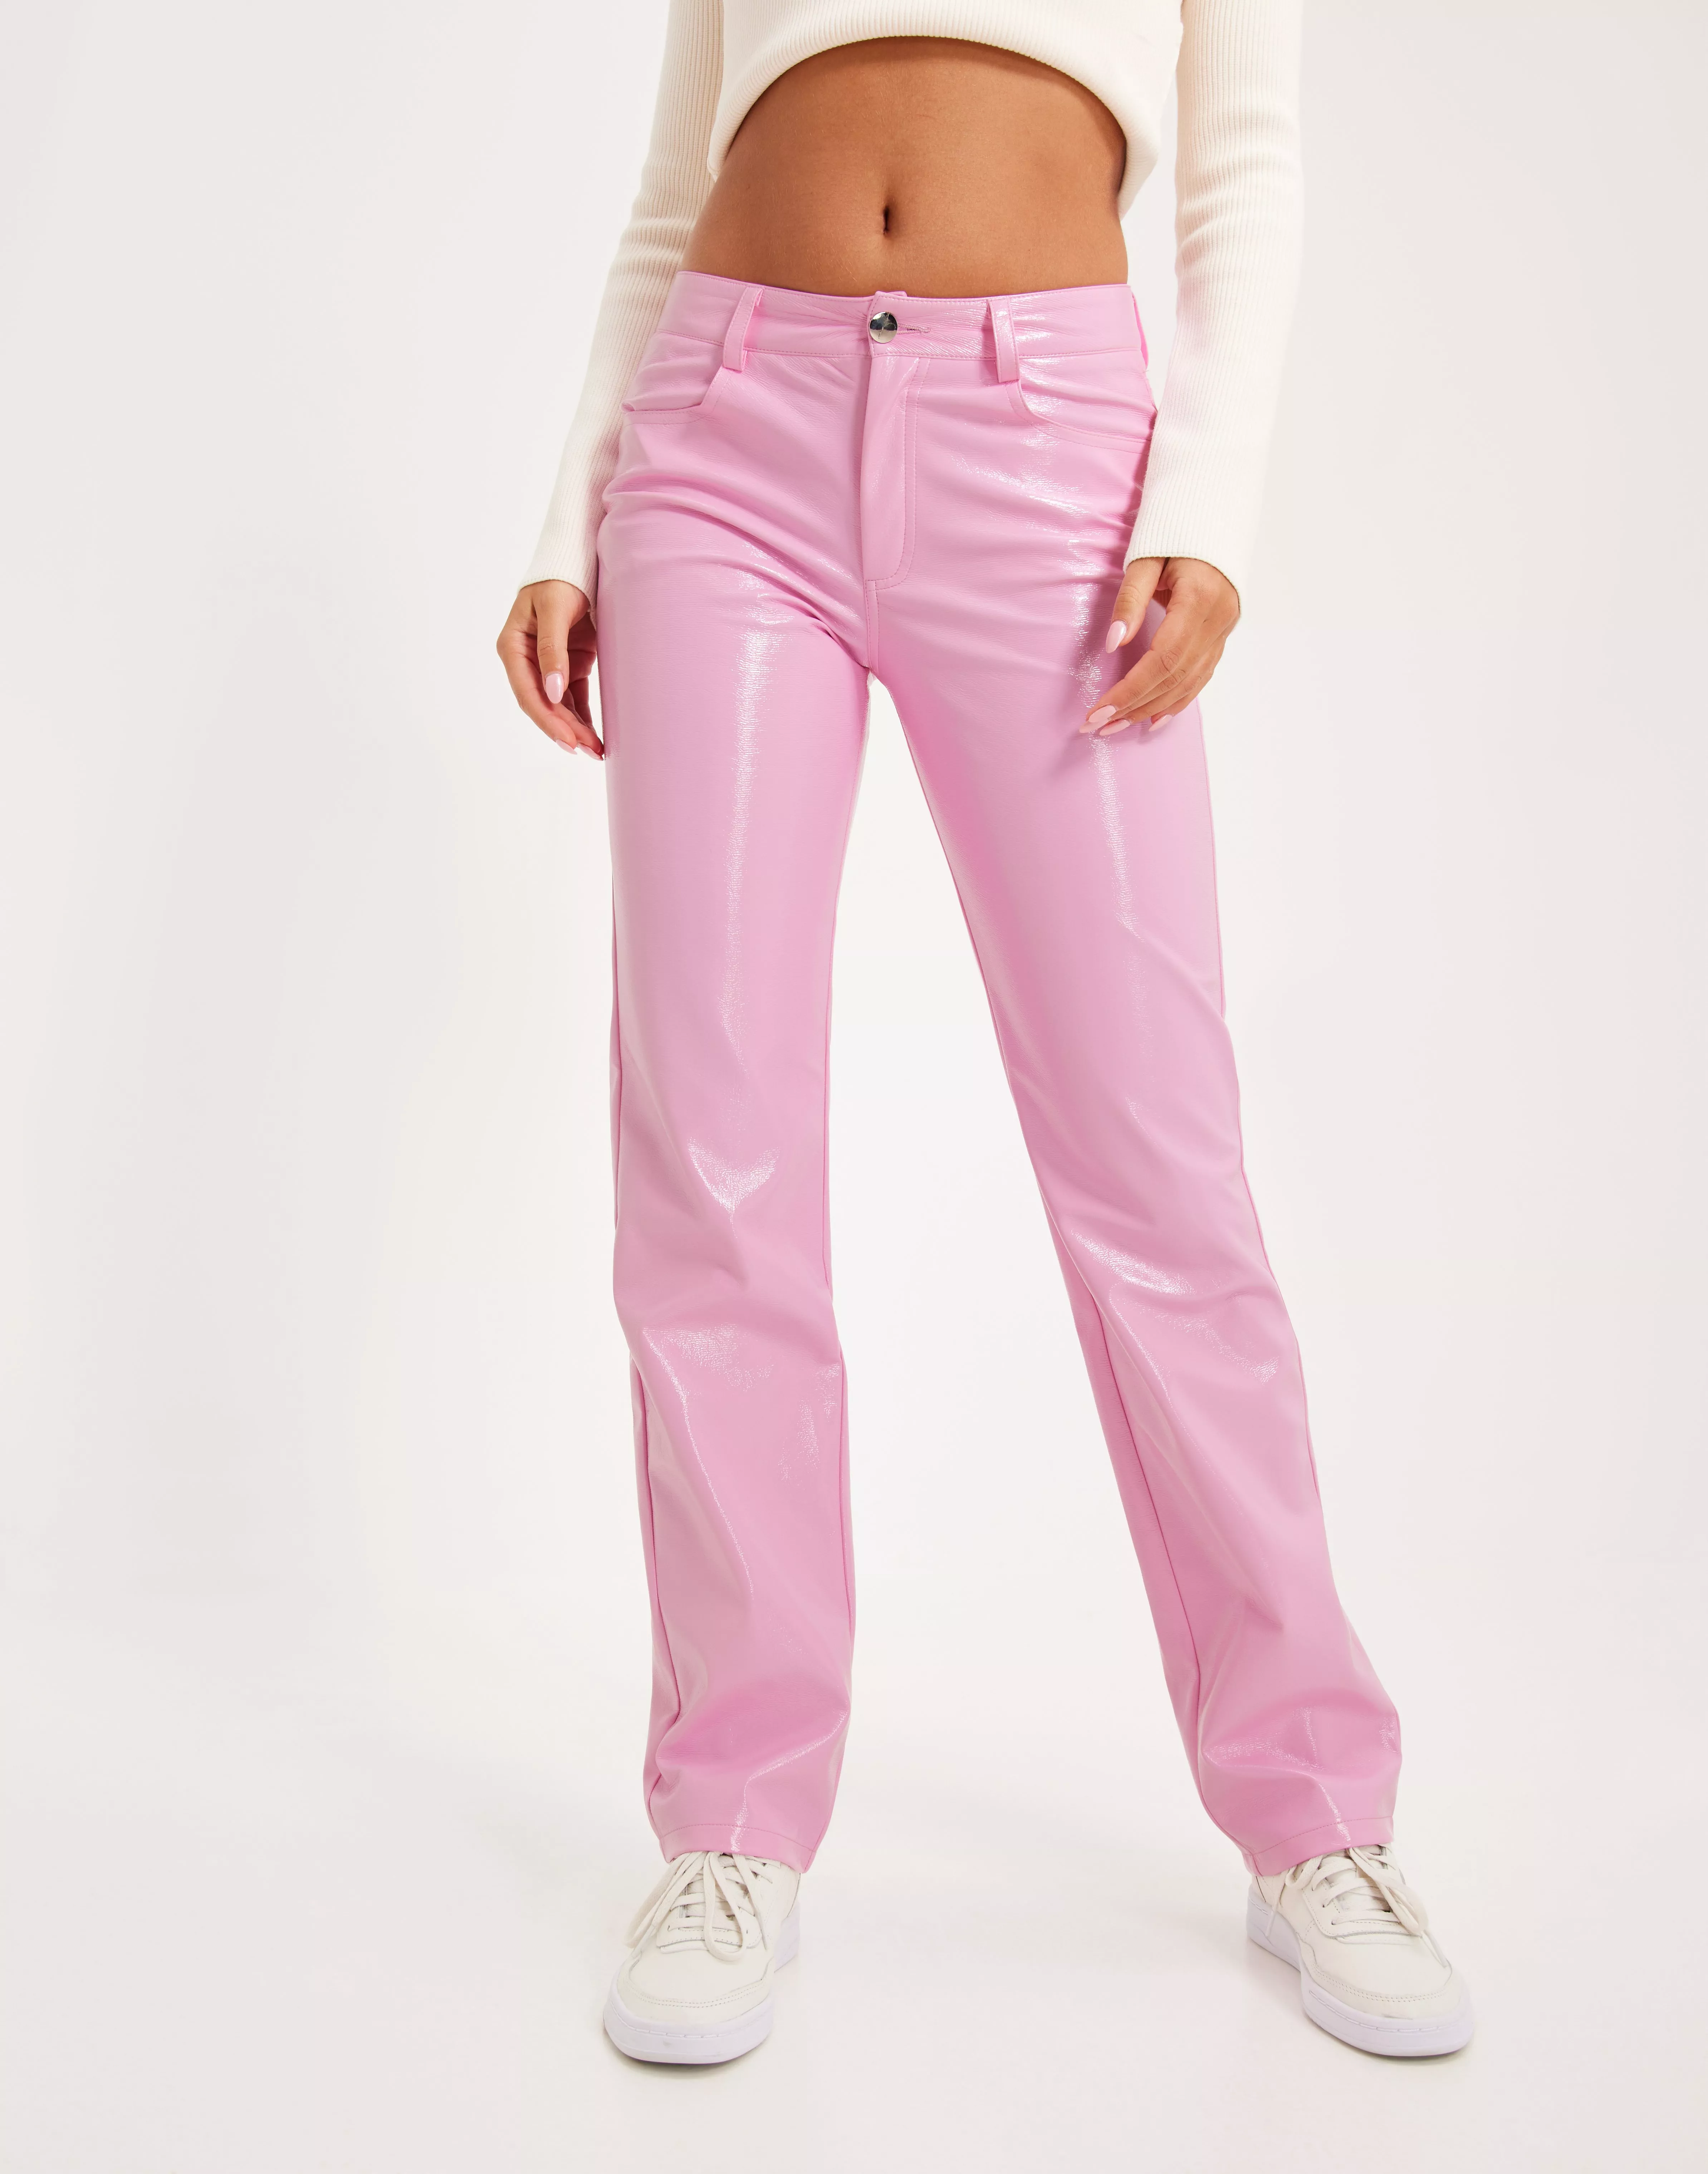 Fritid finger Indkøbscenter Buy Nelly Colored PU Pants - Pink | Nelly.com